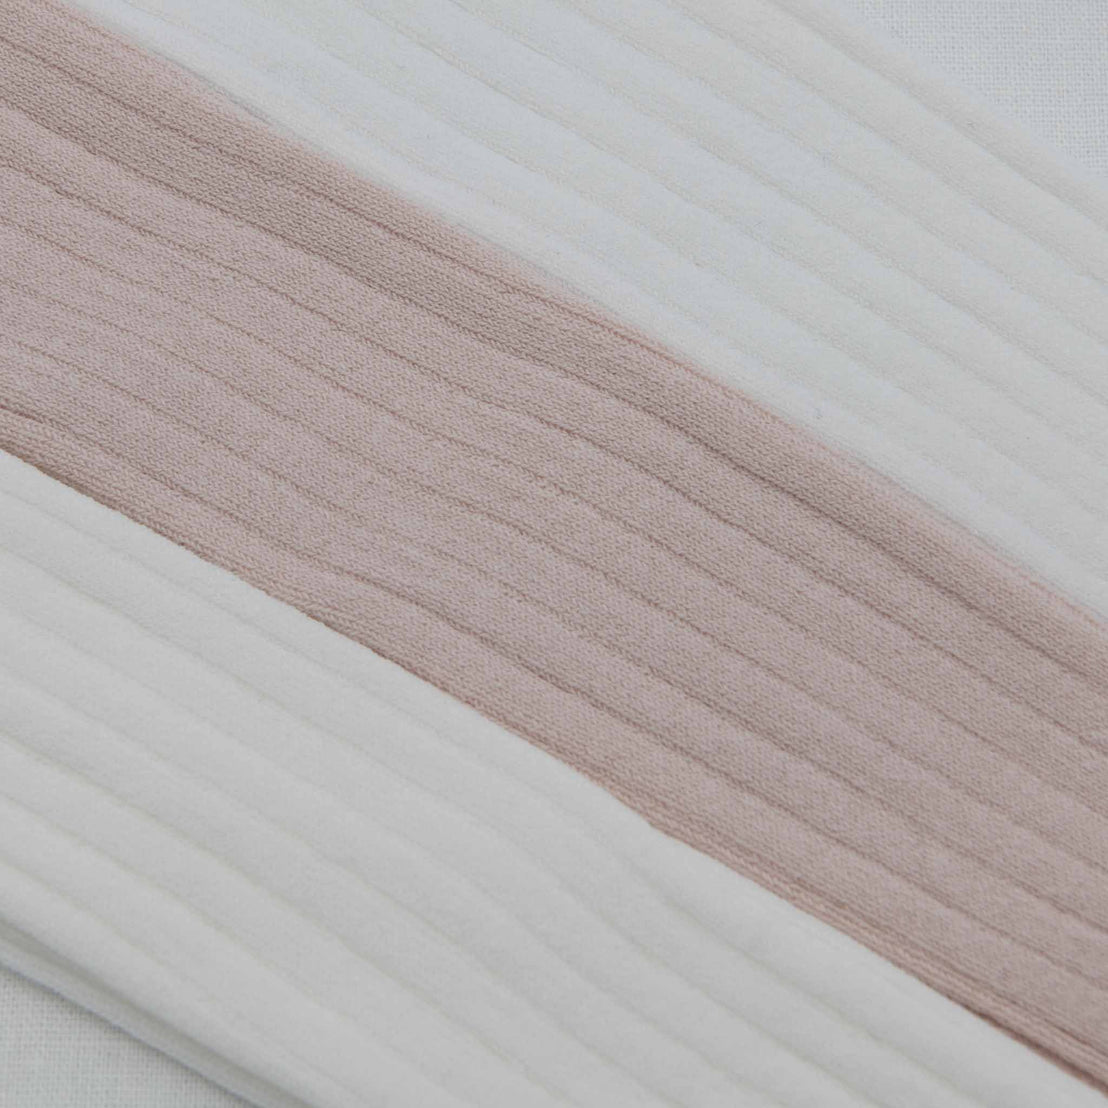 Close-up of a pair of Ribbed Tights with alternating white and pale pink vertical stripes. The texture appears soft with pronounced ridges in the weave.